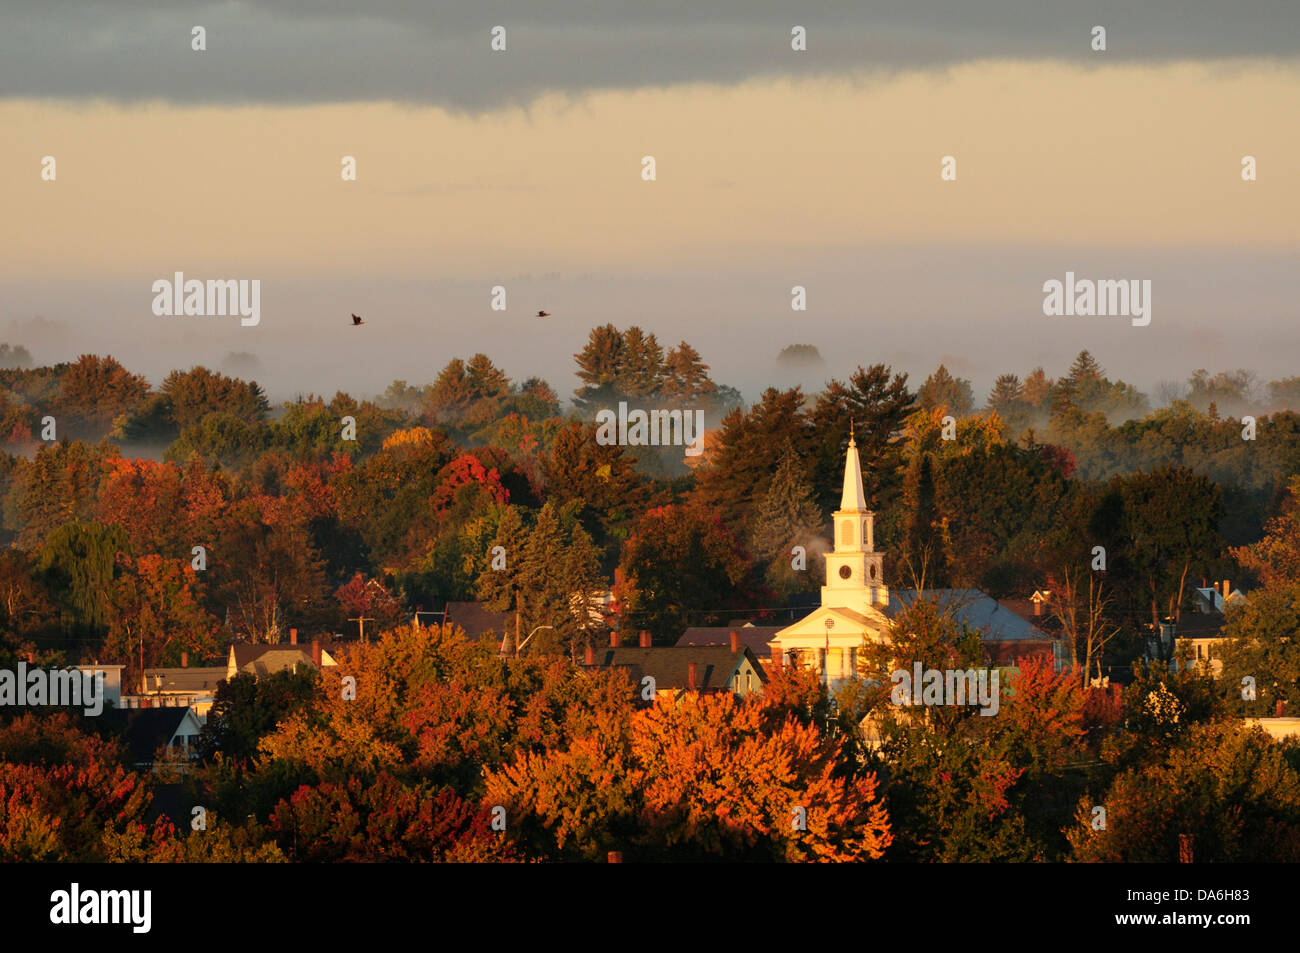 USA, United States, America, New Hampshire, Manchester, North America, New England, East Coast, Merrimack County, Indian Summer, Stock Photo